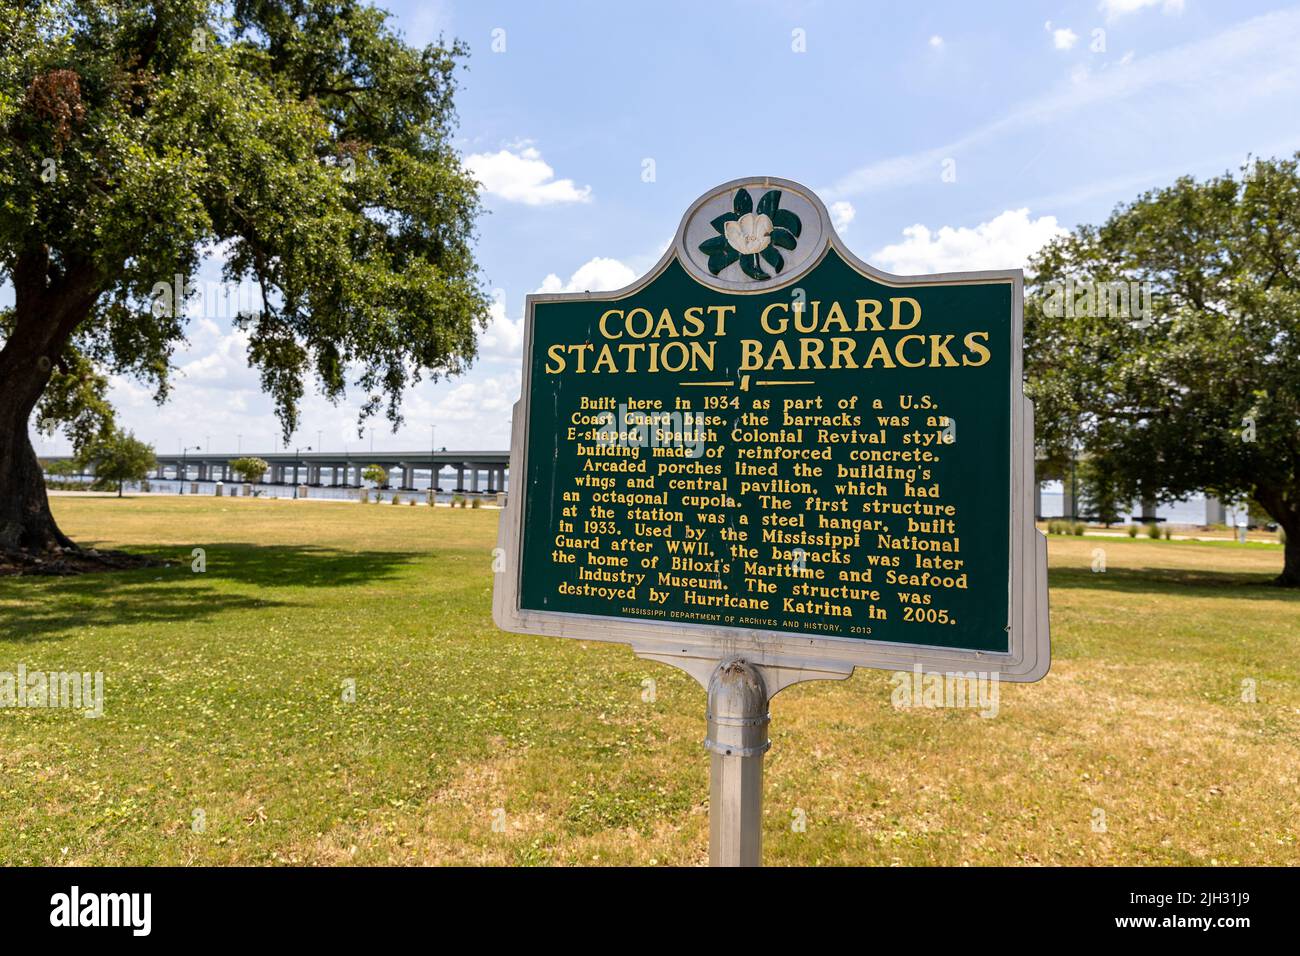 Biloxi, MS - June 18, 2022: Historic marker of the Coast Guard Station Barracks in Biloxi, MS that was destroyed in 2005 by Hurricane Katrina. Stock Photo